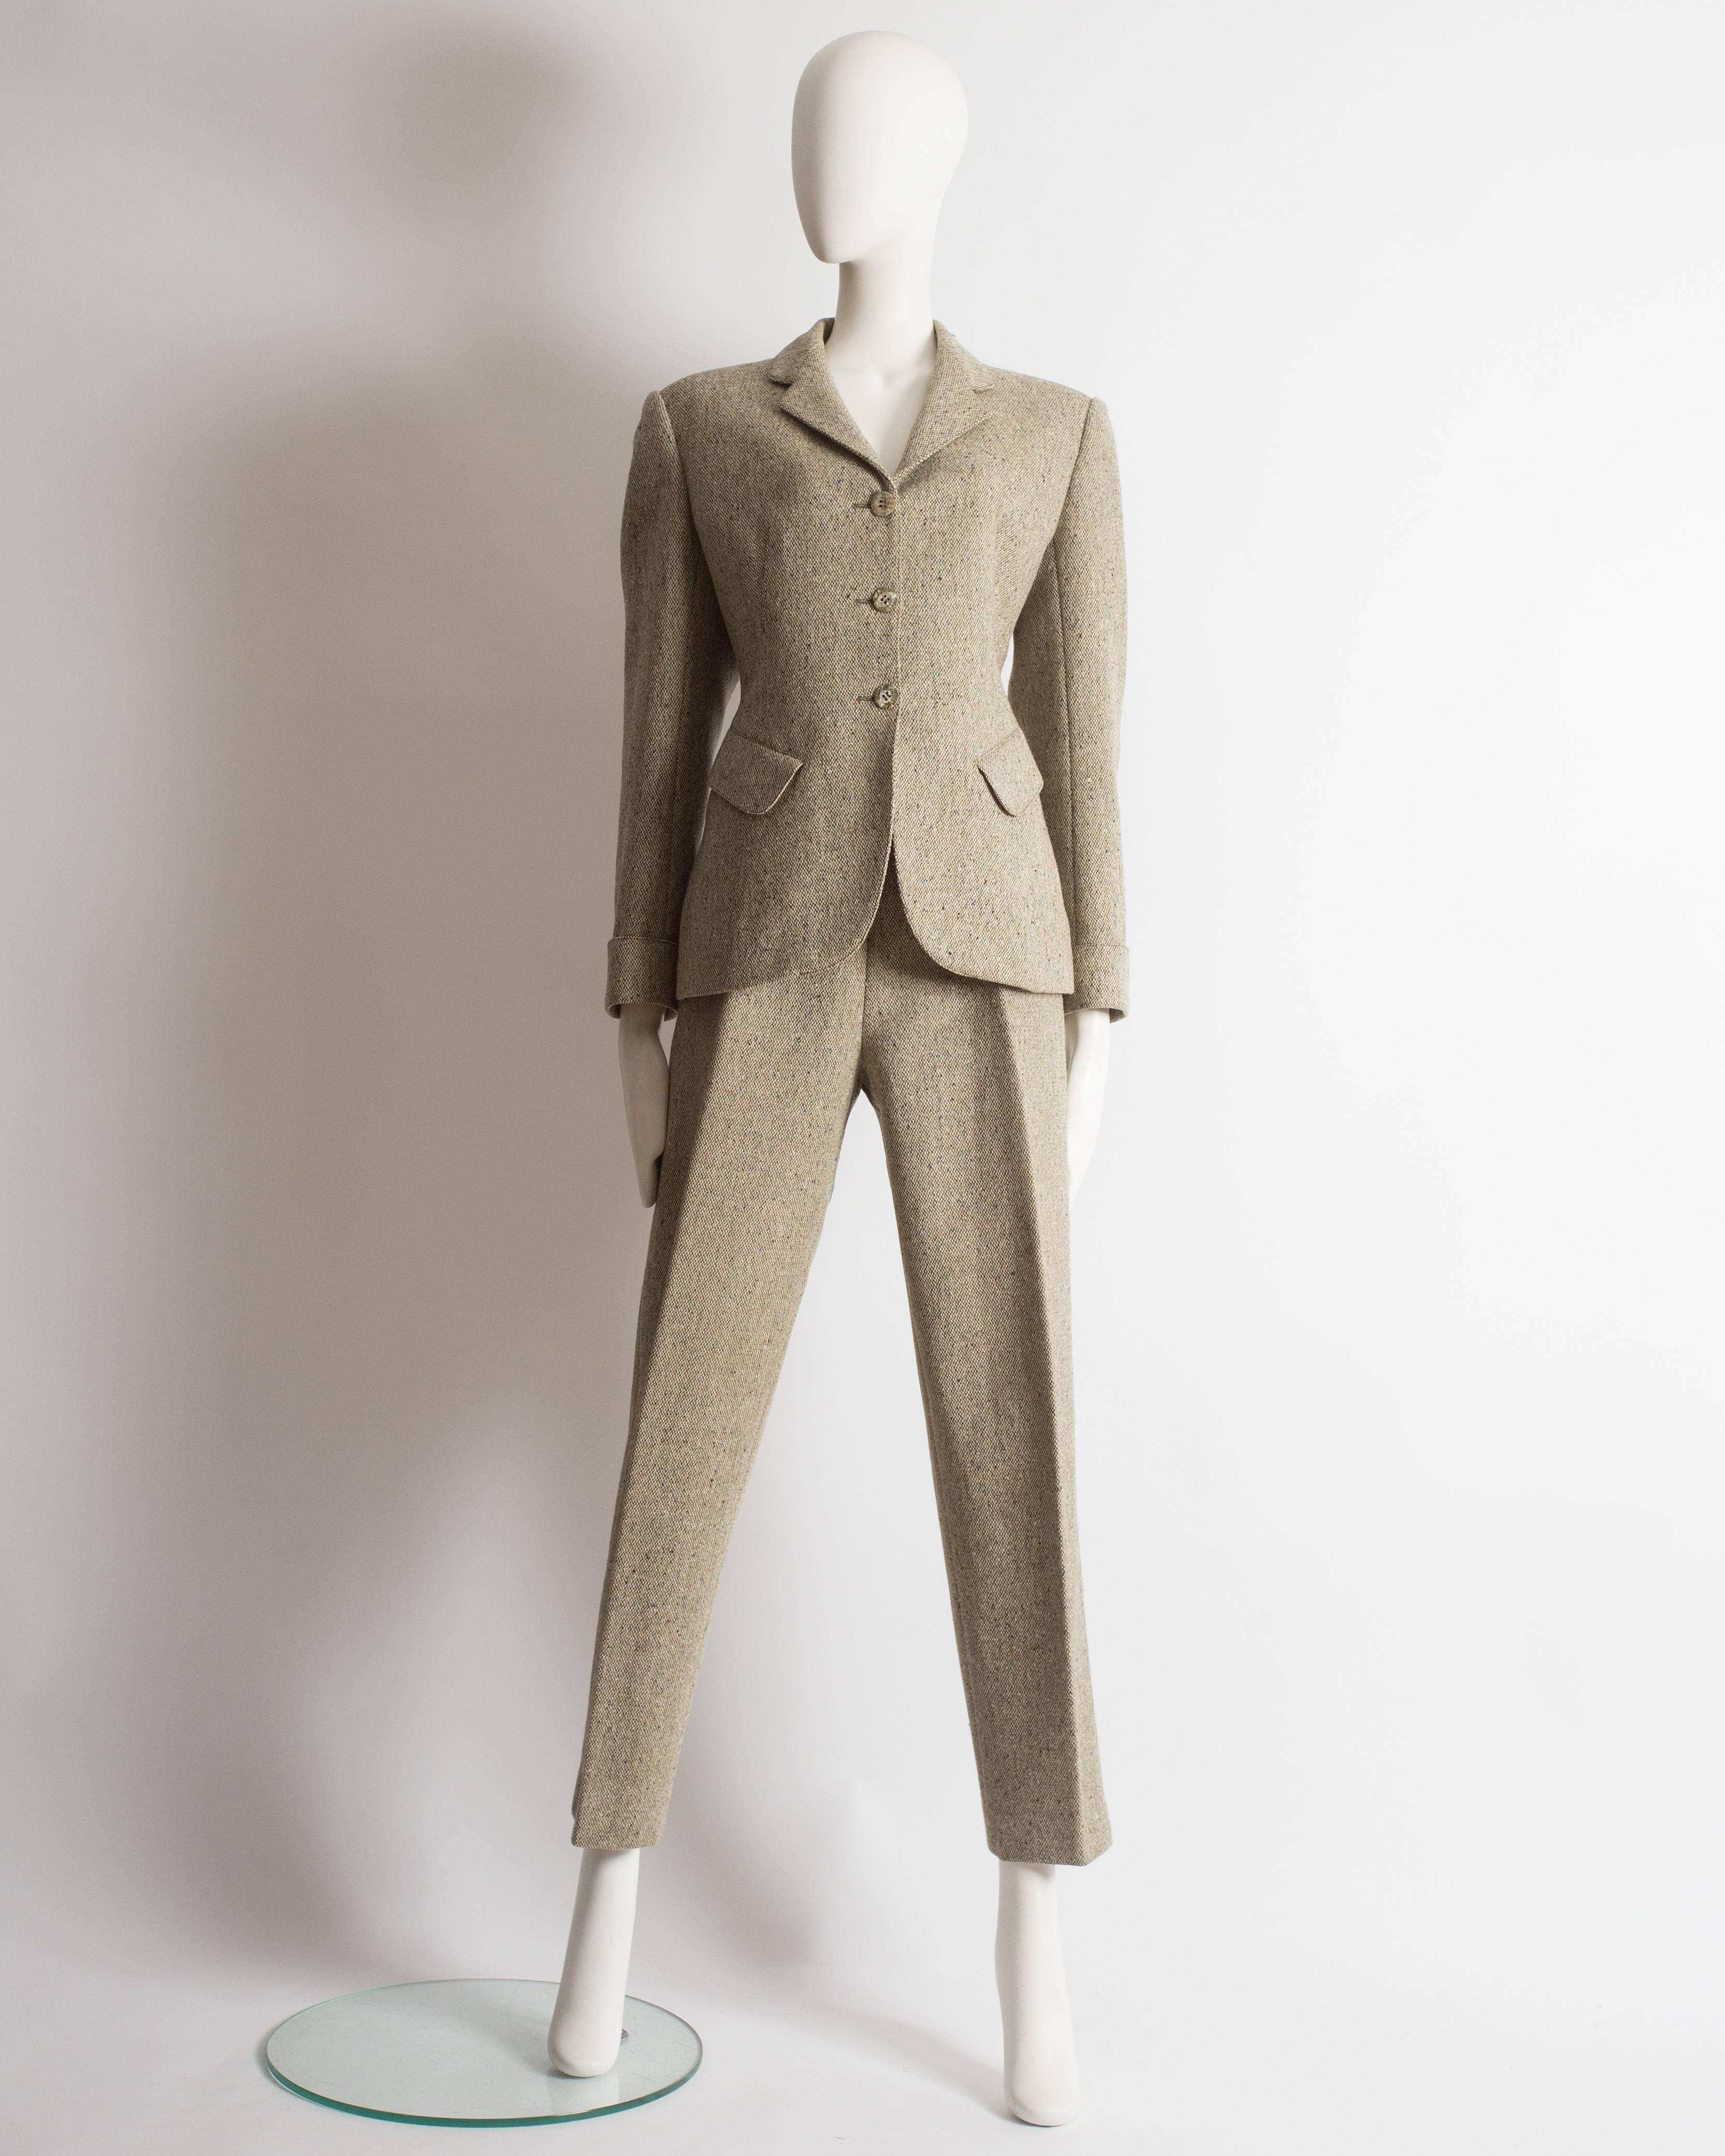 Alaia pant suit constructed in wool tweed, Autumn-Winter 1987. High waisted cigarette pants with center pleats, blazer jacket with three button closure, turnover cuffs, diagonal front flap pockets and silk lining. 
